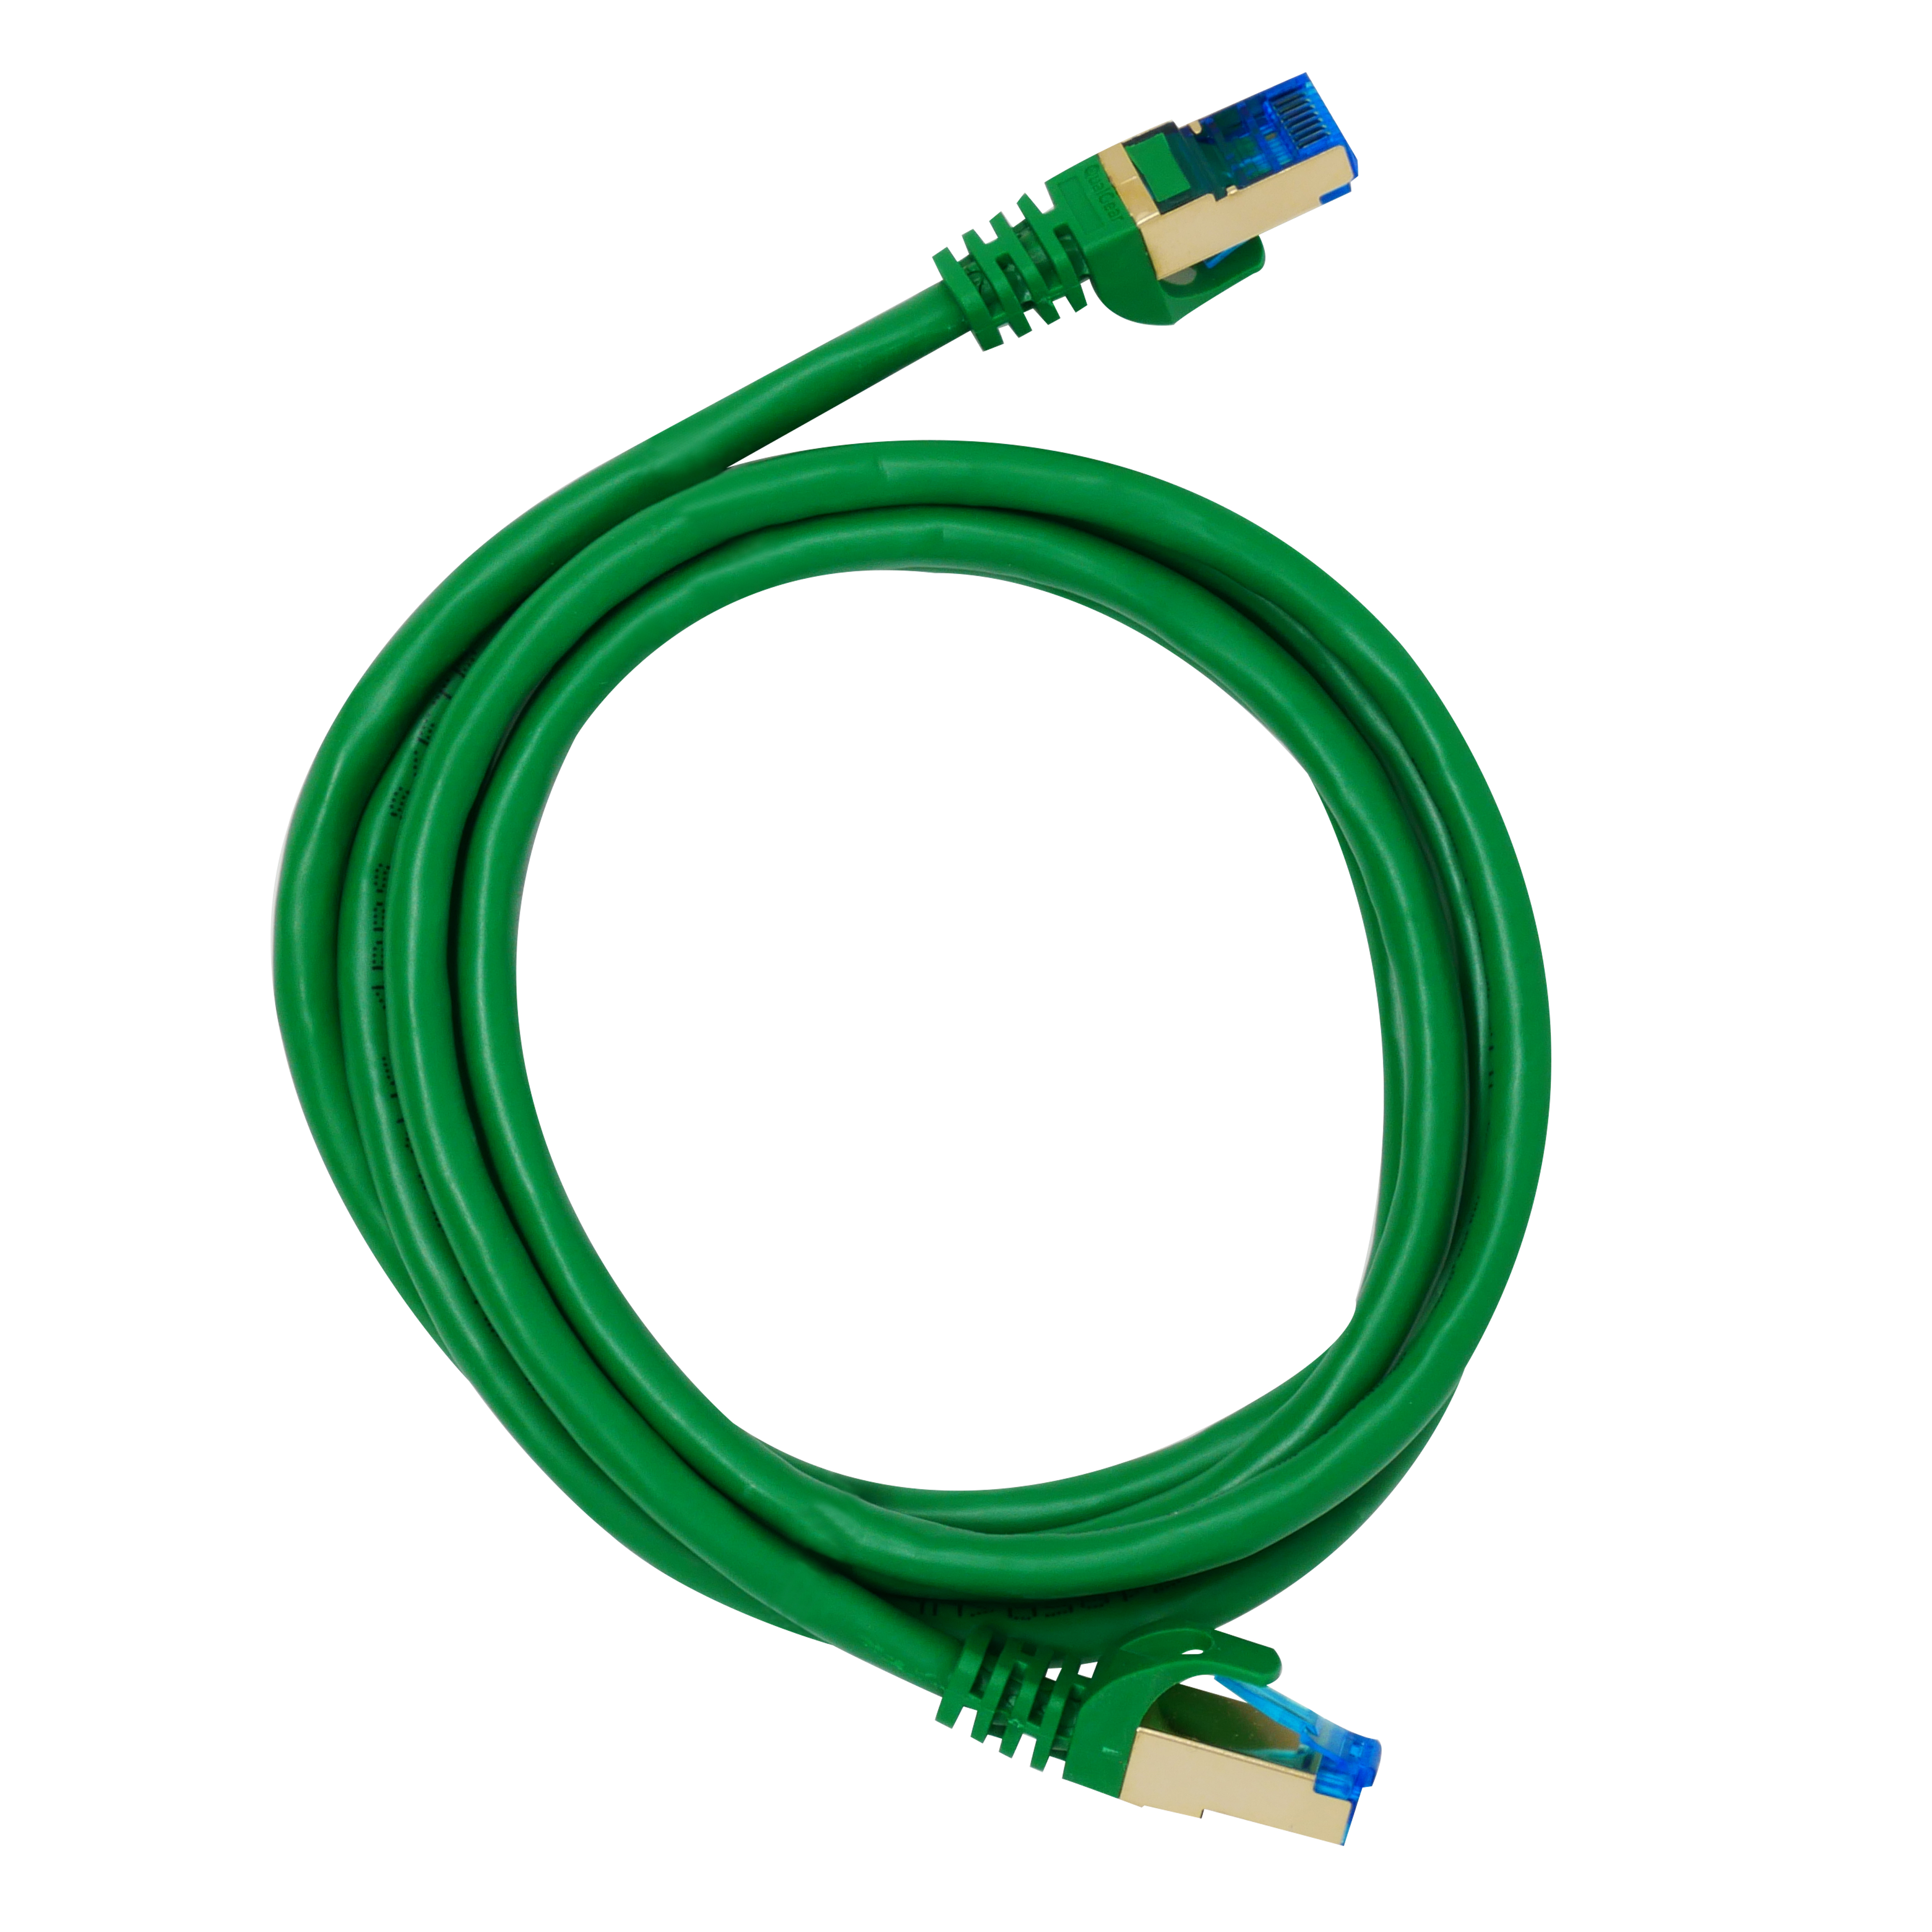 QualGear QG-CAT7R-6FT-GRN CAT 7 S/FTP Ethernet Cable Length 6 feet - 26 AWG, 10 Gbps, Gold Plated Contacts, RJ45, 99.99% OFC Copper, Color Green